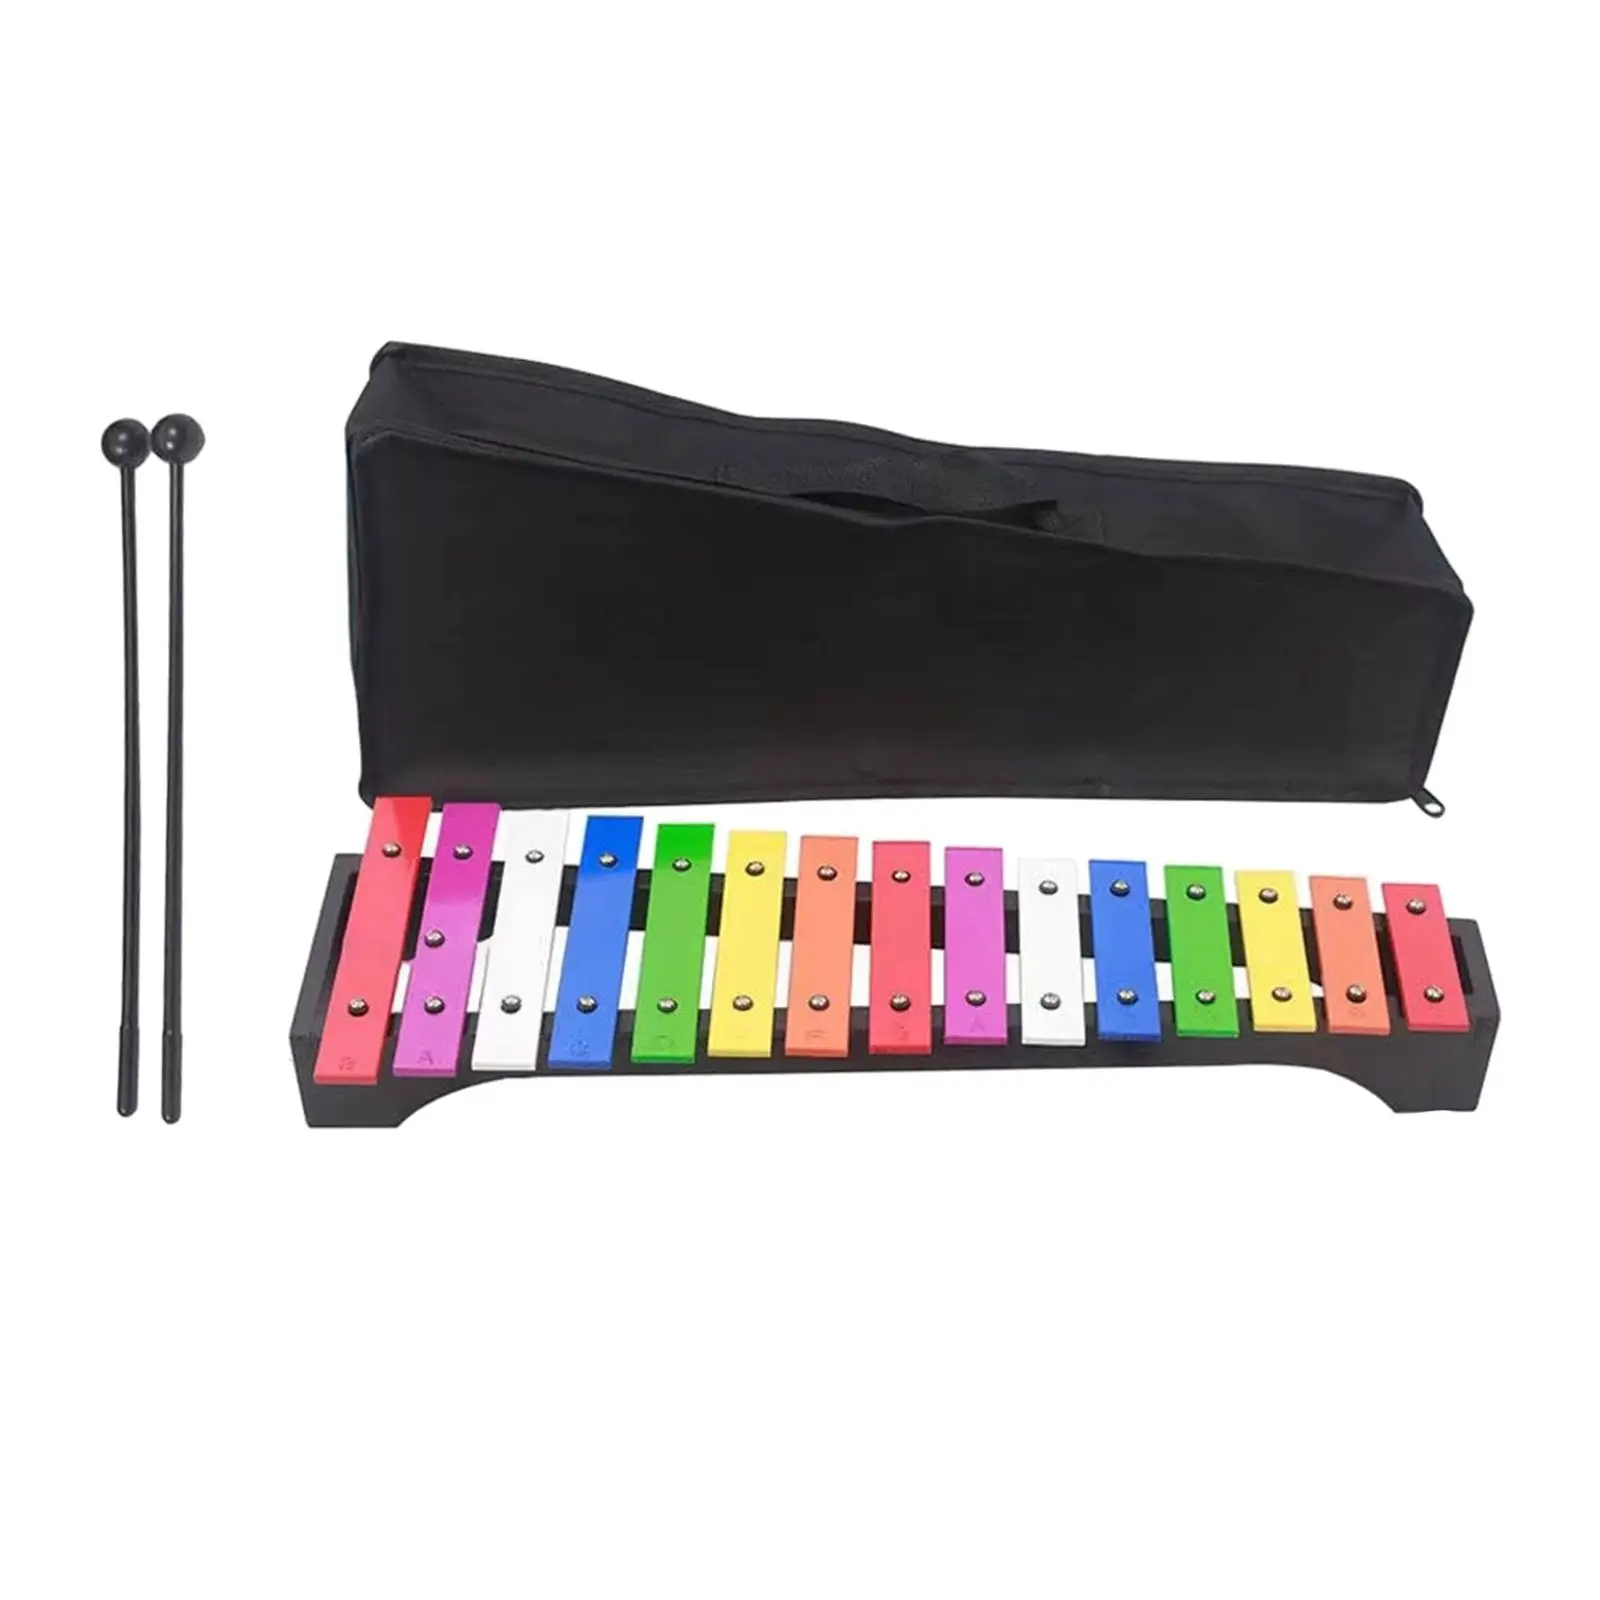 15 Note Xylophone Metal Enlightenment Percussion Instrument for Outside Live Performance Event School Orchestras Music Lessons